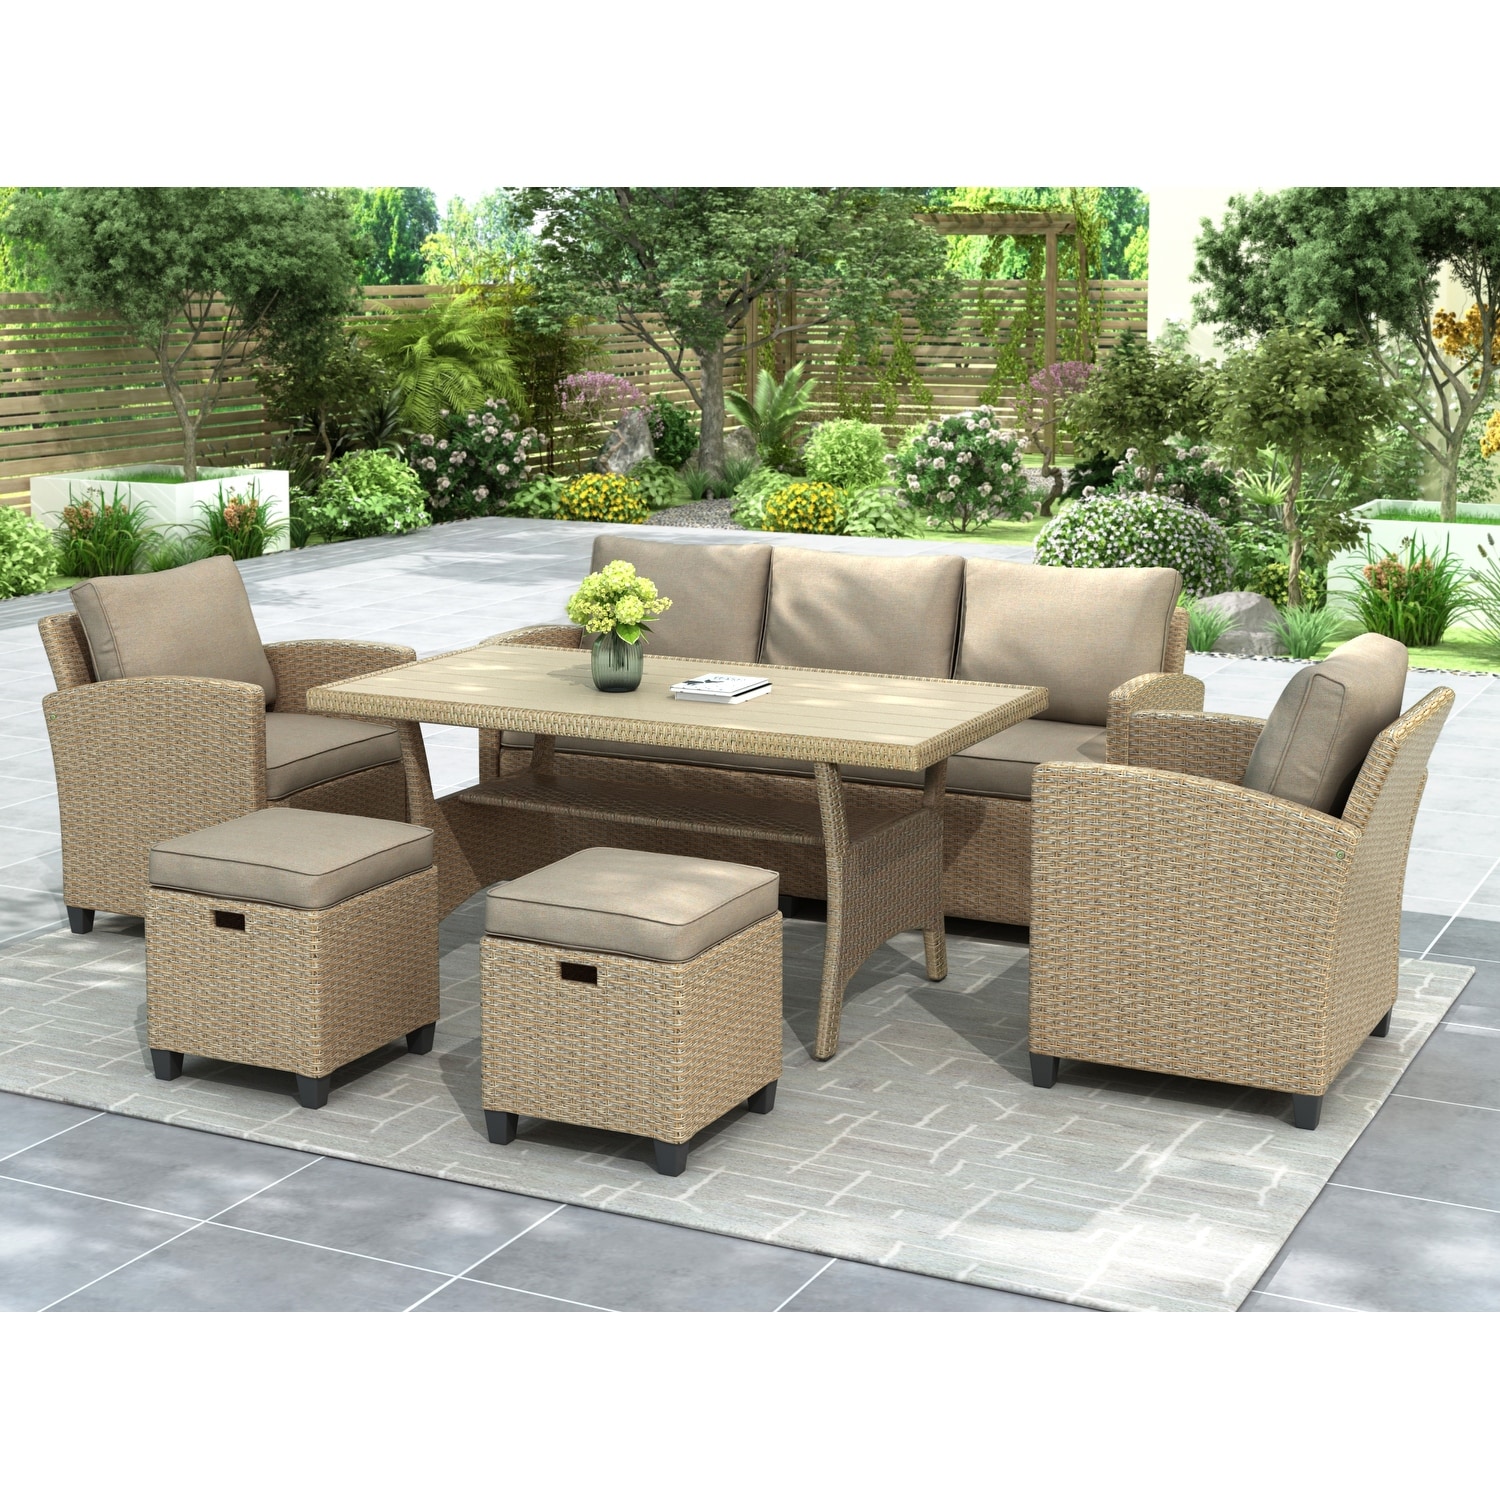 Outdoor Rattan Wicker Sofa Set With Table  Thick Cushions  And Weather Resistant Design